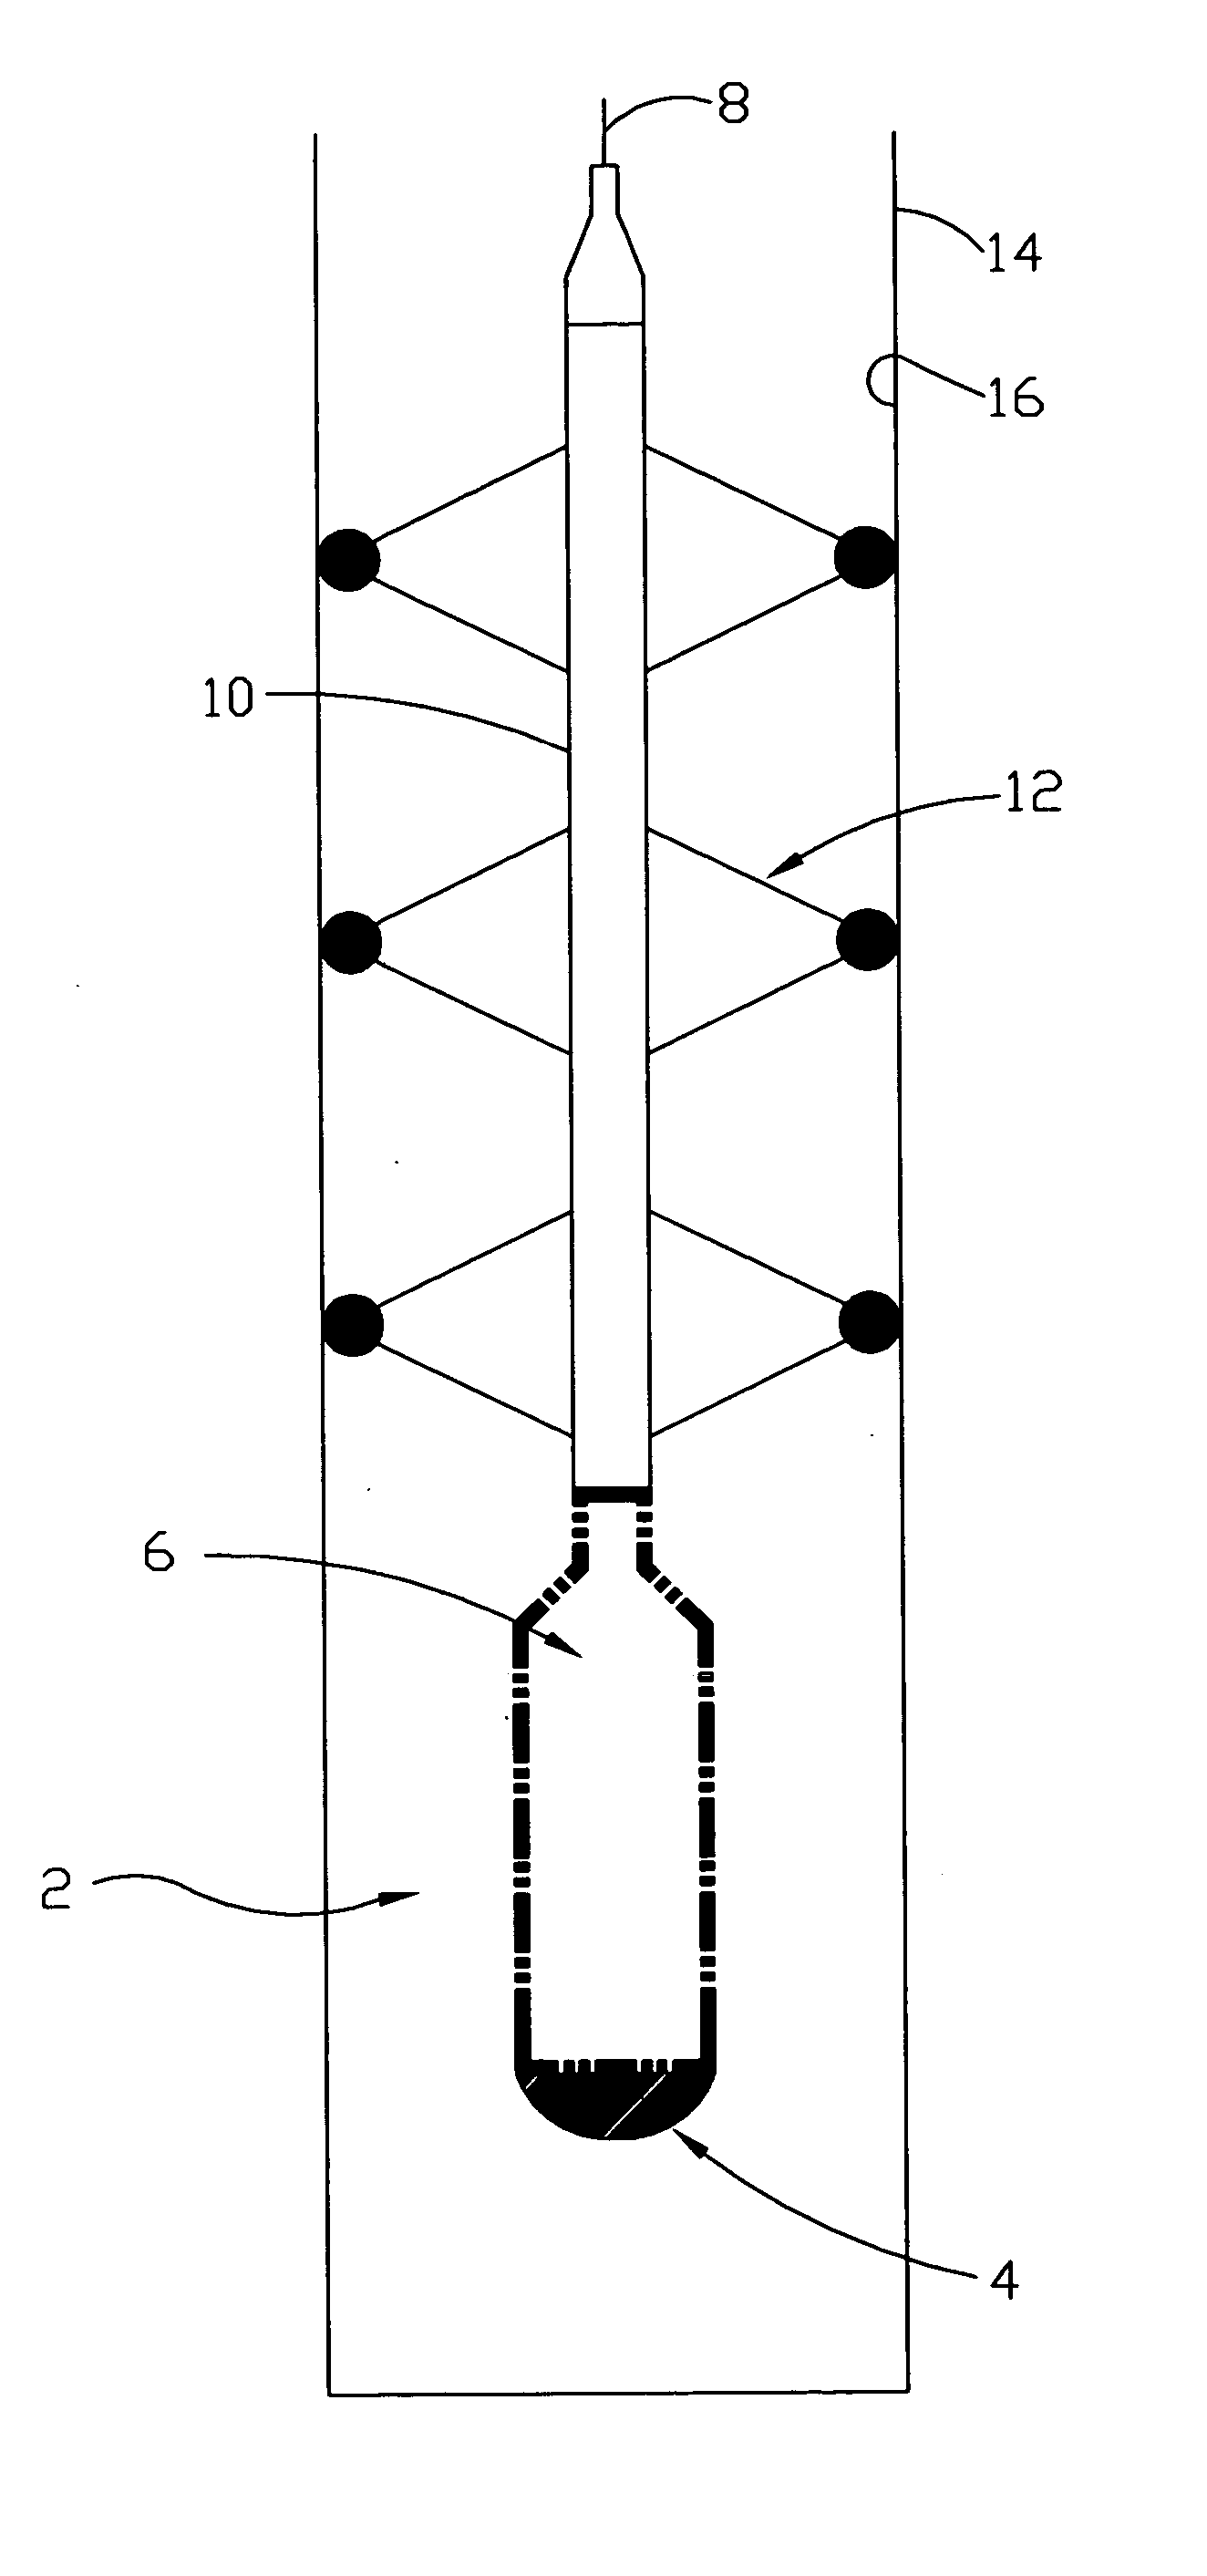 Acoustic device and method for determining interface integrity